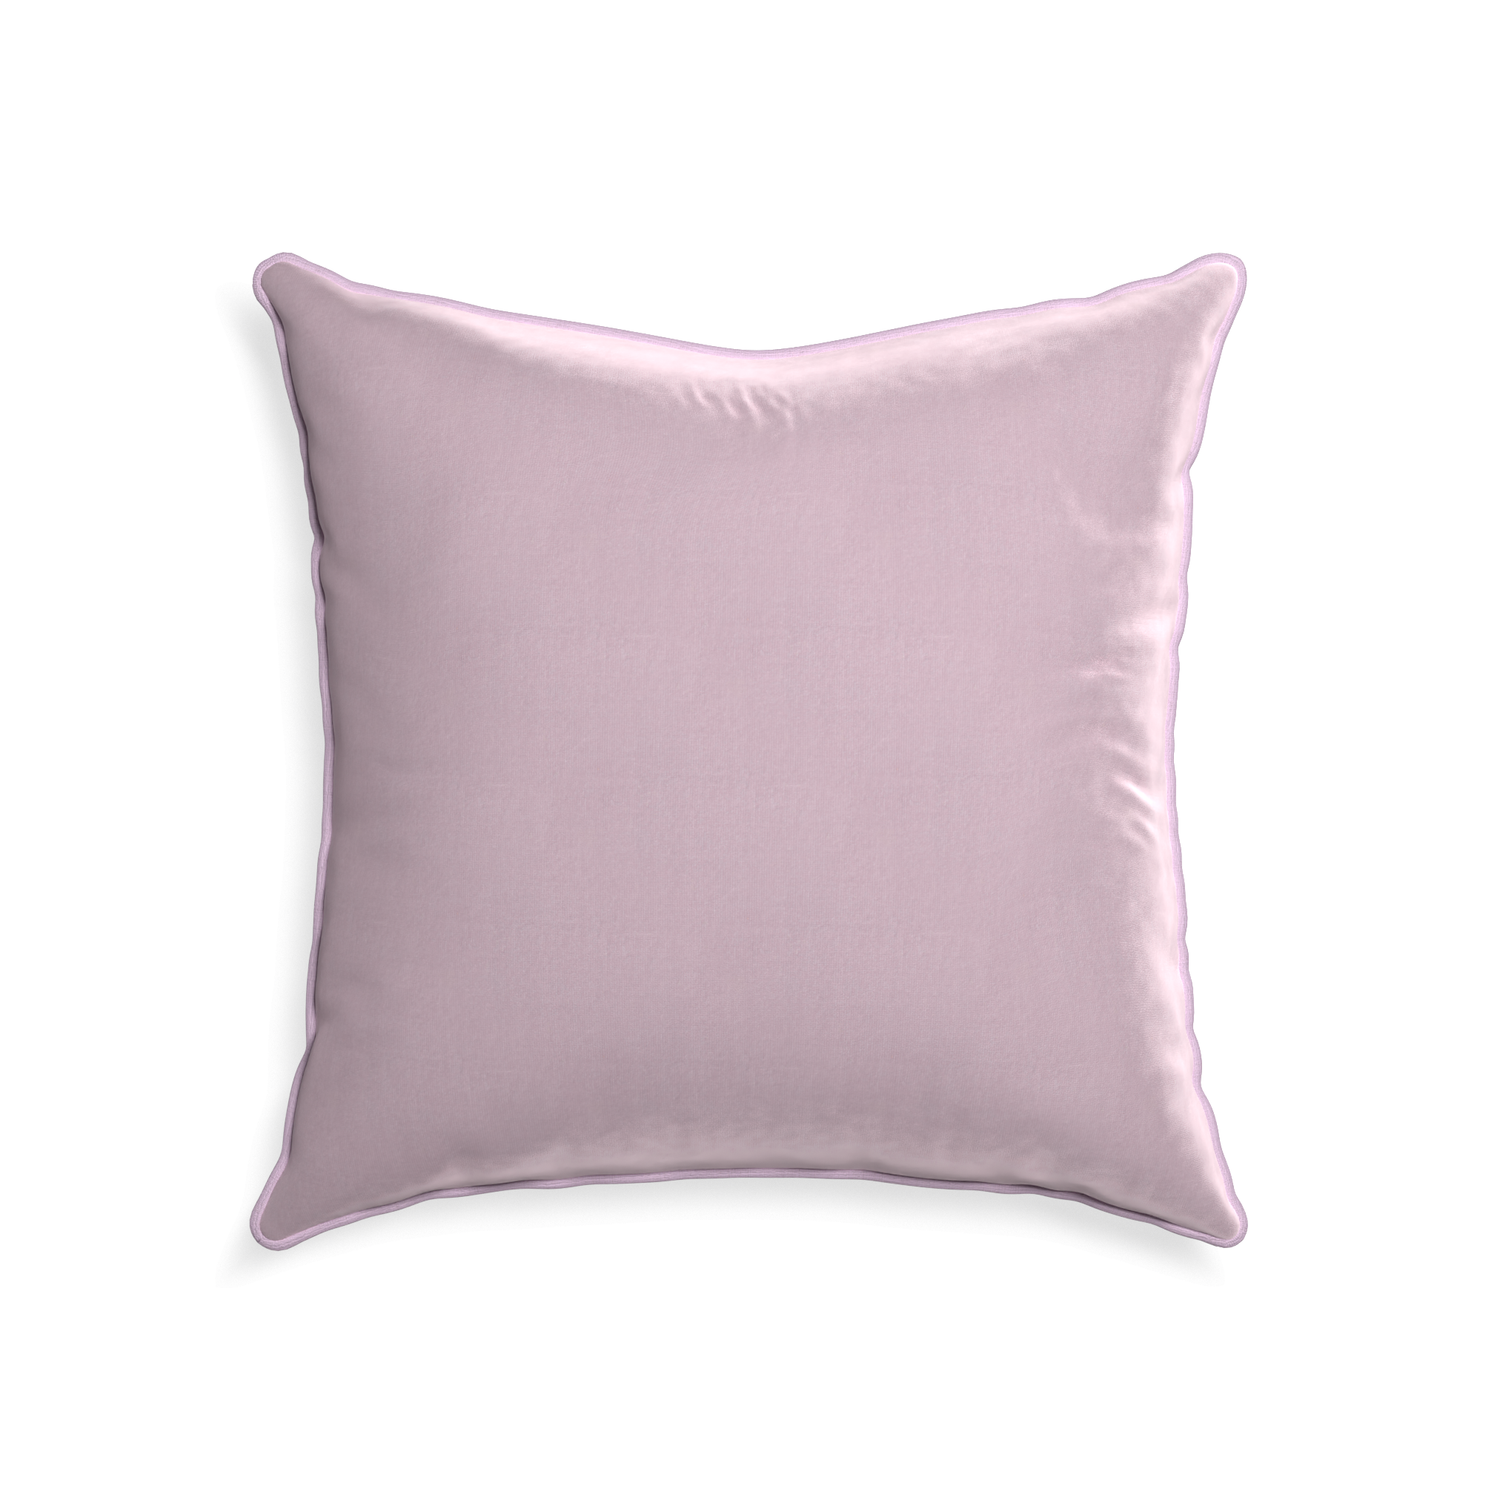 22-square lilac velvet custom lilacpillow with l piping on white background